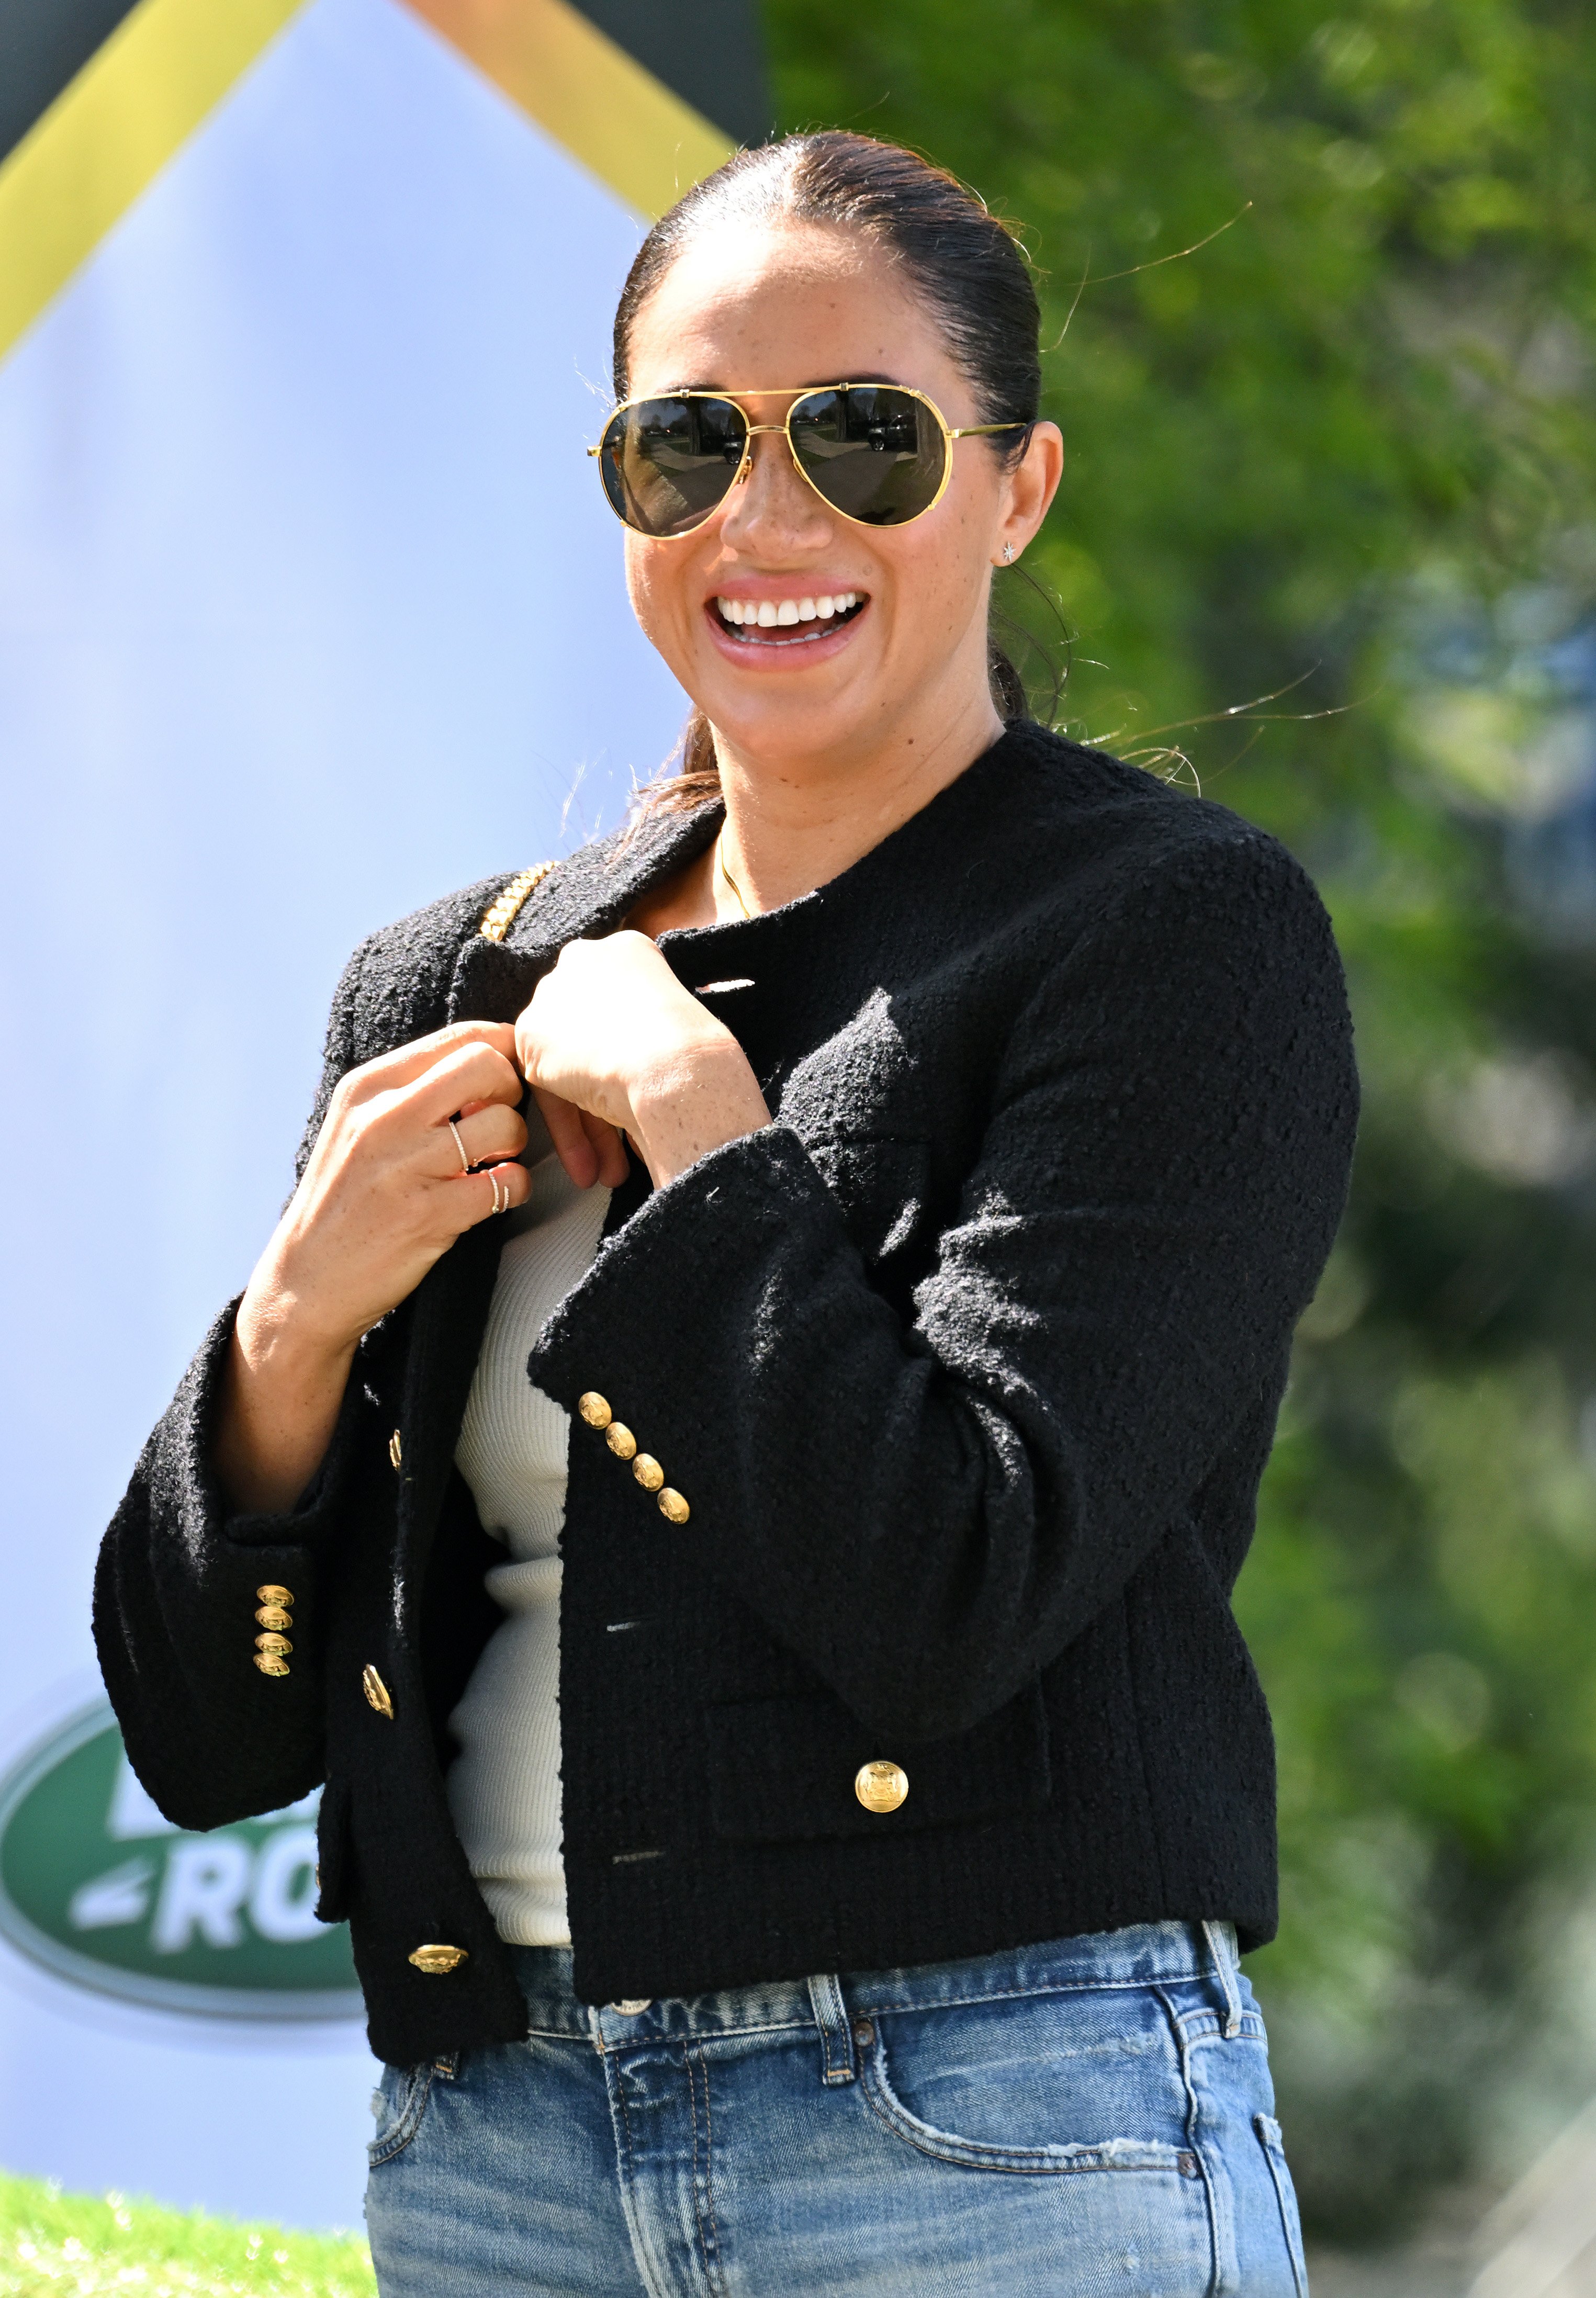 eghan, Duchess of Sussex at the Land Rover Driving Challenge during the 2022 Invictus Games at Zuiderpark on April 16, 2022 in The Hague, Netherlands. | Source: Getty Images